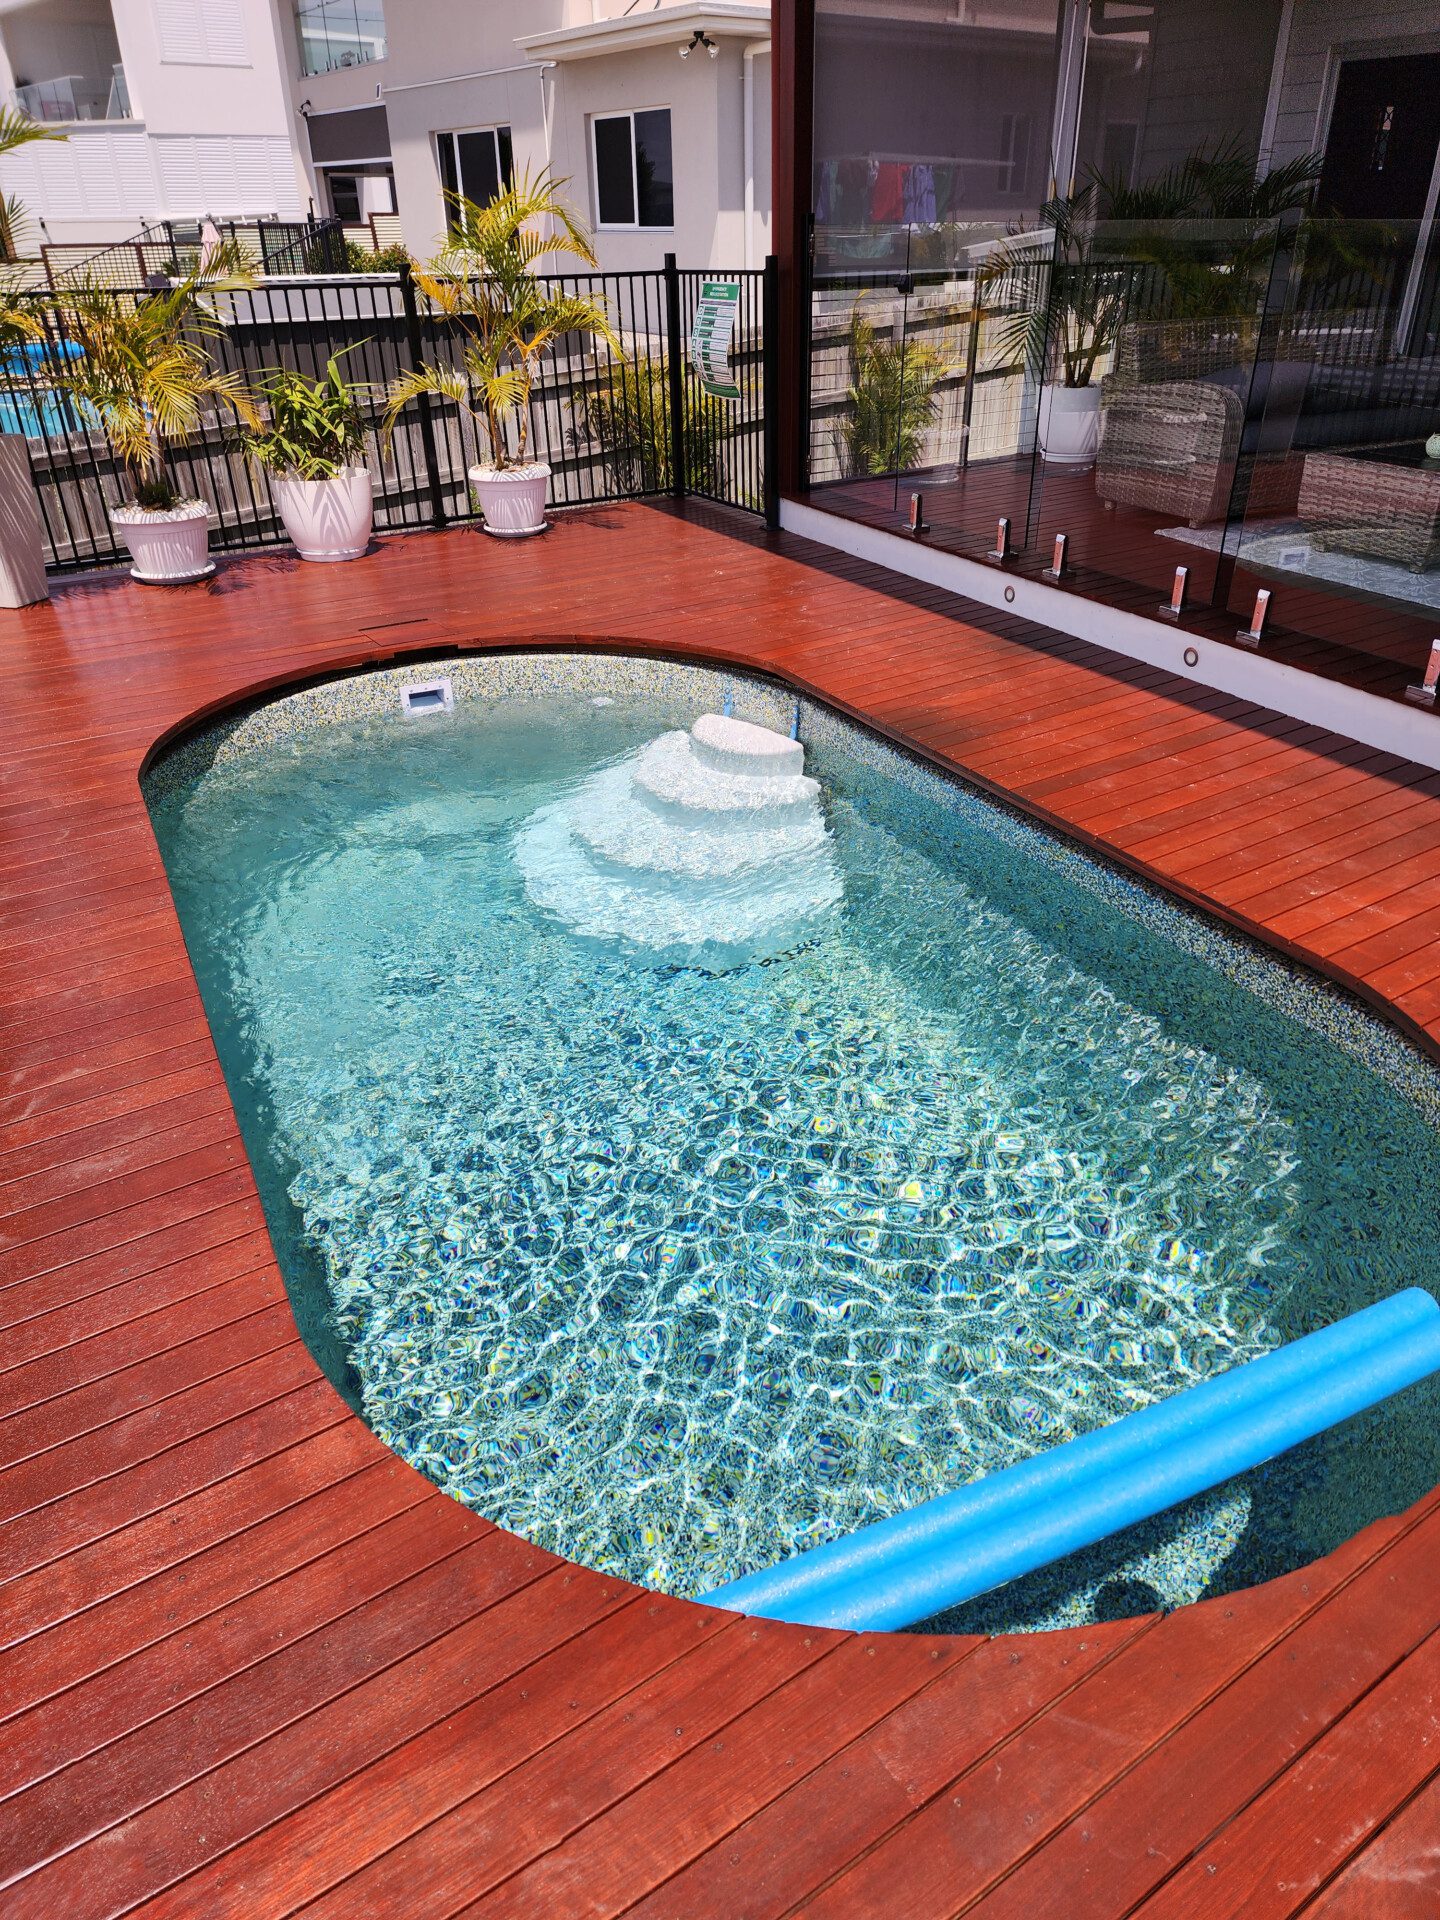 The Benefits of Owning a Swimming Pool - Leisure Pools USA